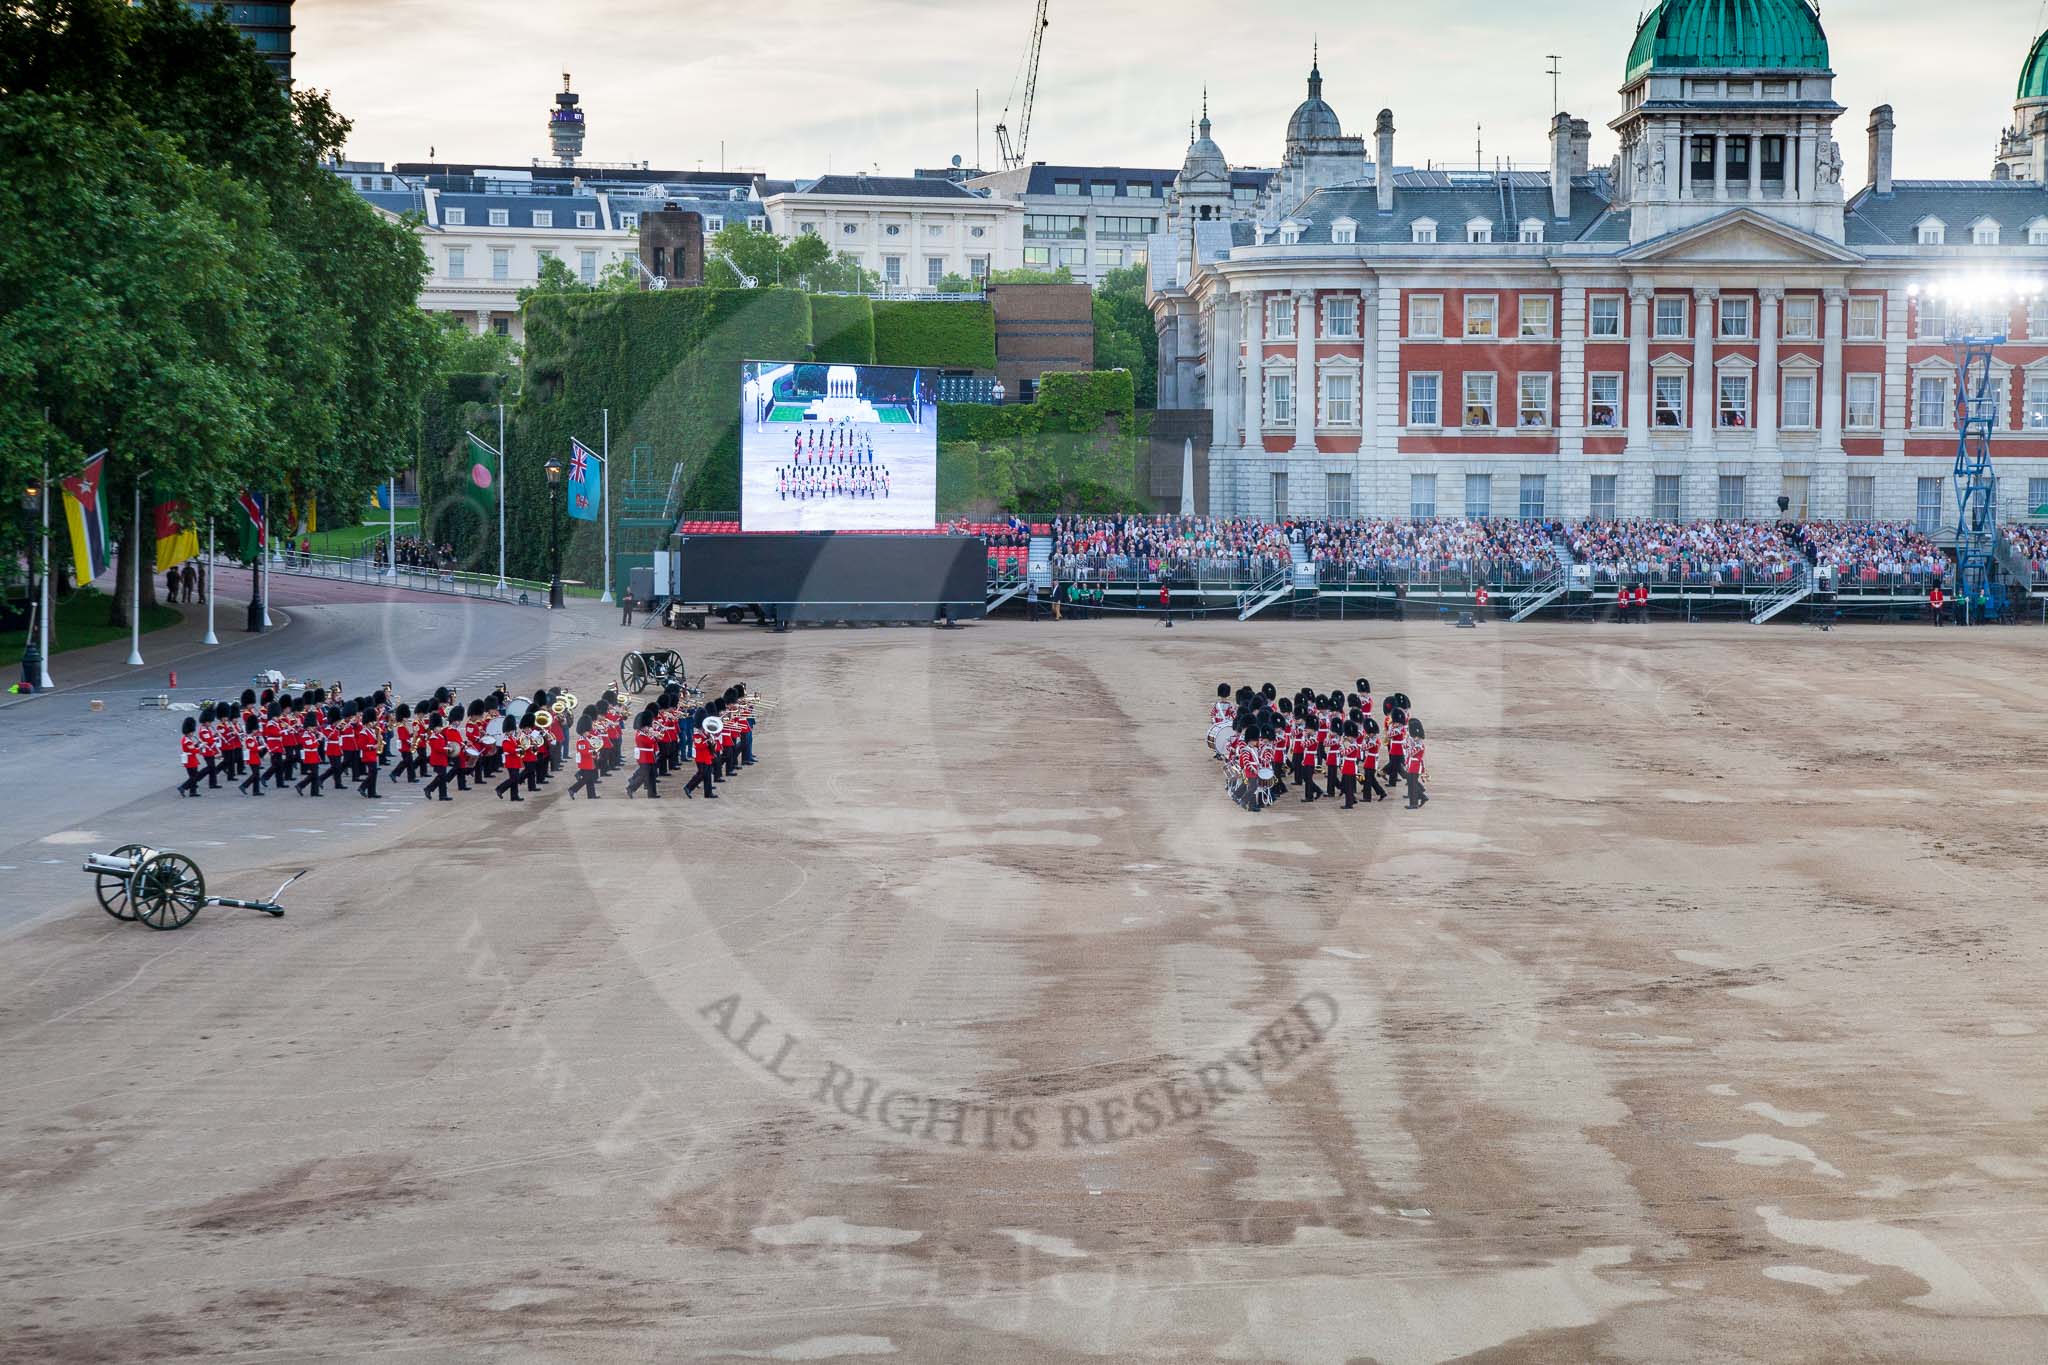 Beating Retreat 2014.
Horse Guards Parade, Westminster,
London SW1A,

United Kingdom,
on 11 June 2014 at 20:53, image #228